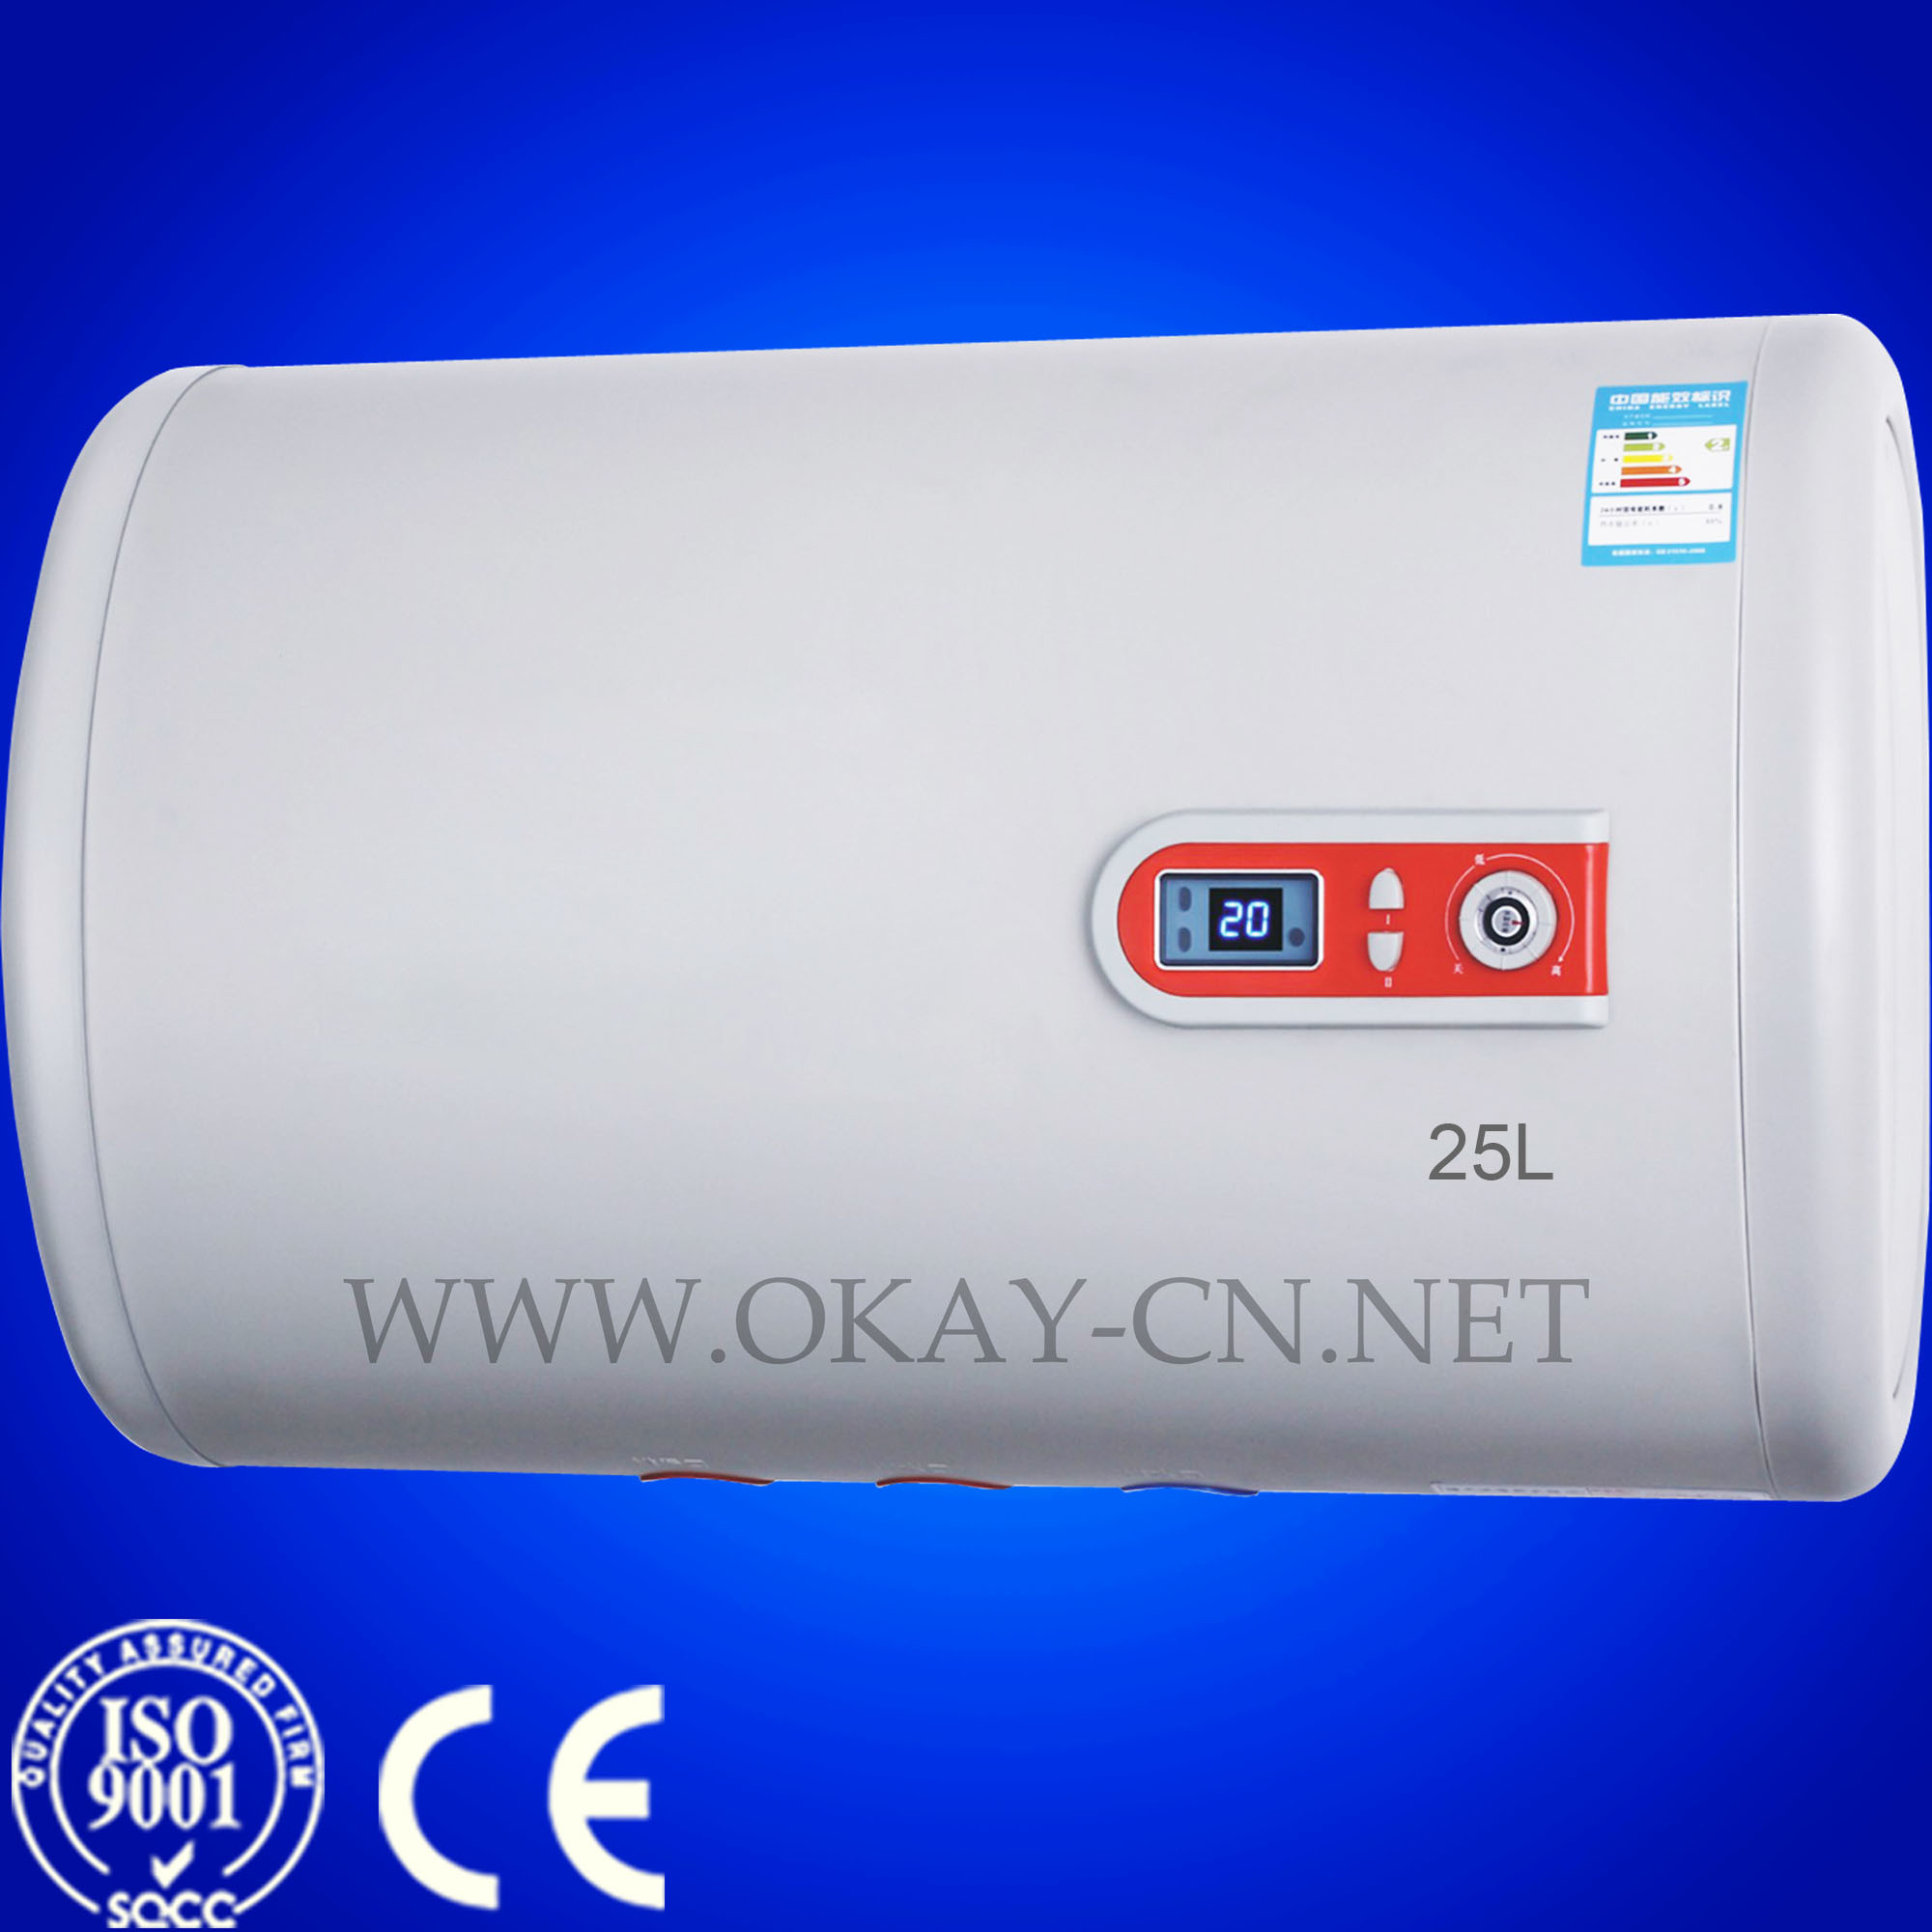 New Storage Water Heater with 25L